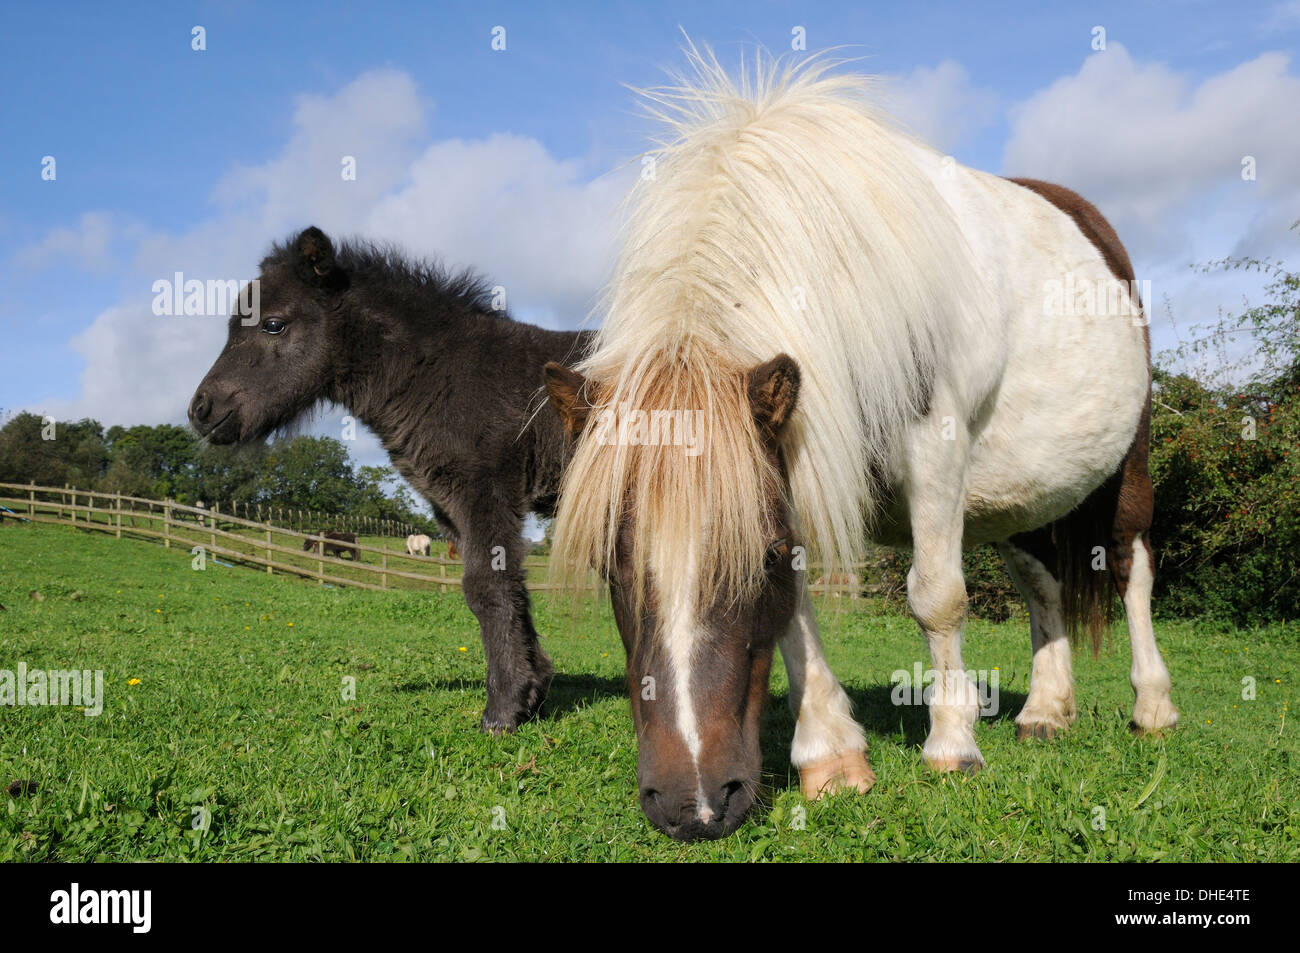 American miniature horse (Equus caballus) mare grazing in a grassy paddock next to her foal, Wiltshire, UK, September. Stock Photo